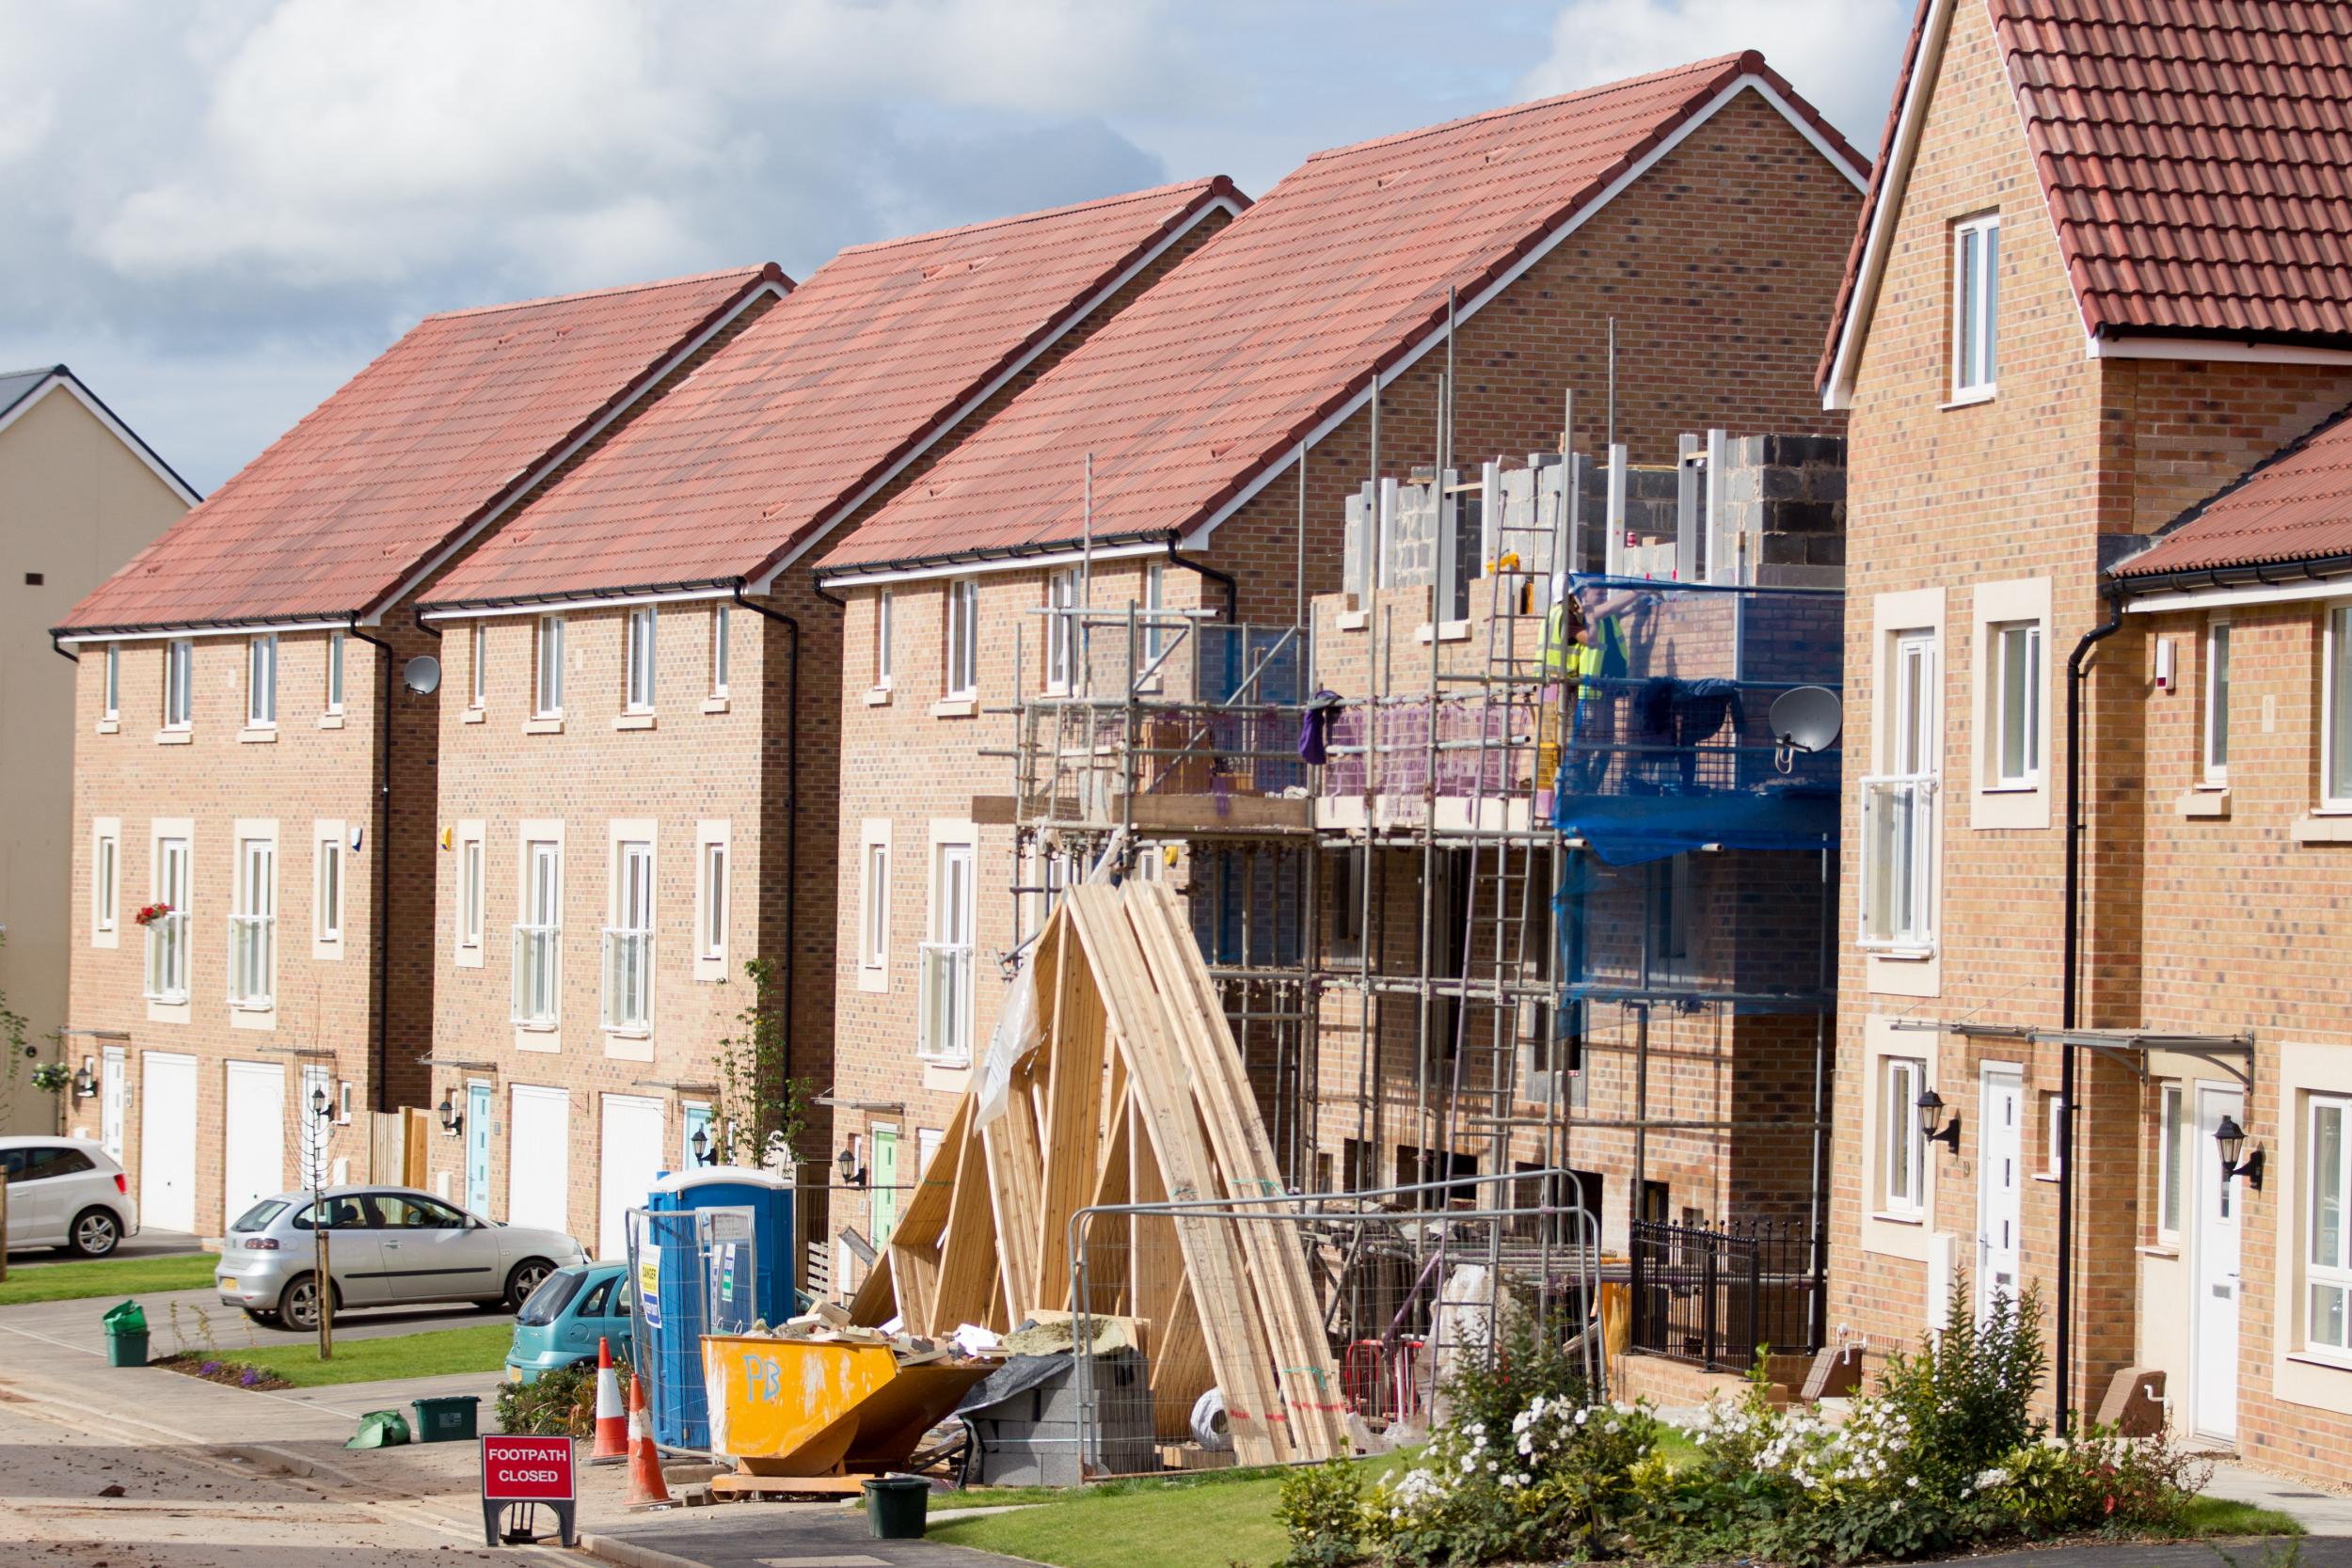 Rather than waiting for major construction firms to work their way through the government’s long list of housebuilding projects, the scheme will see smaller businesses take on less extensive sites that have already have planning permission